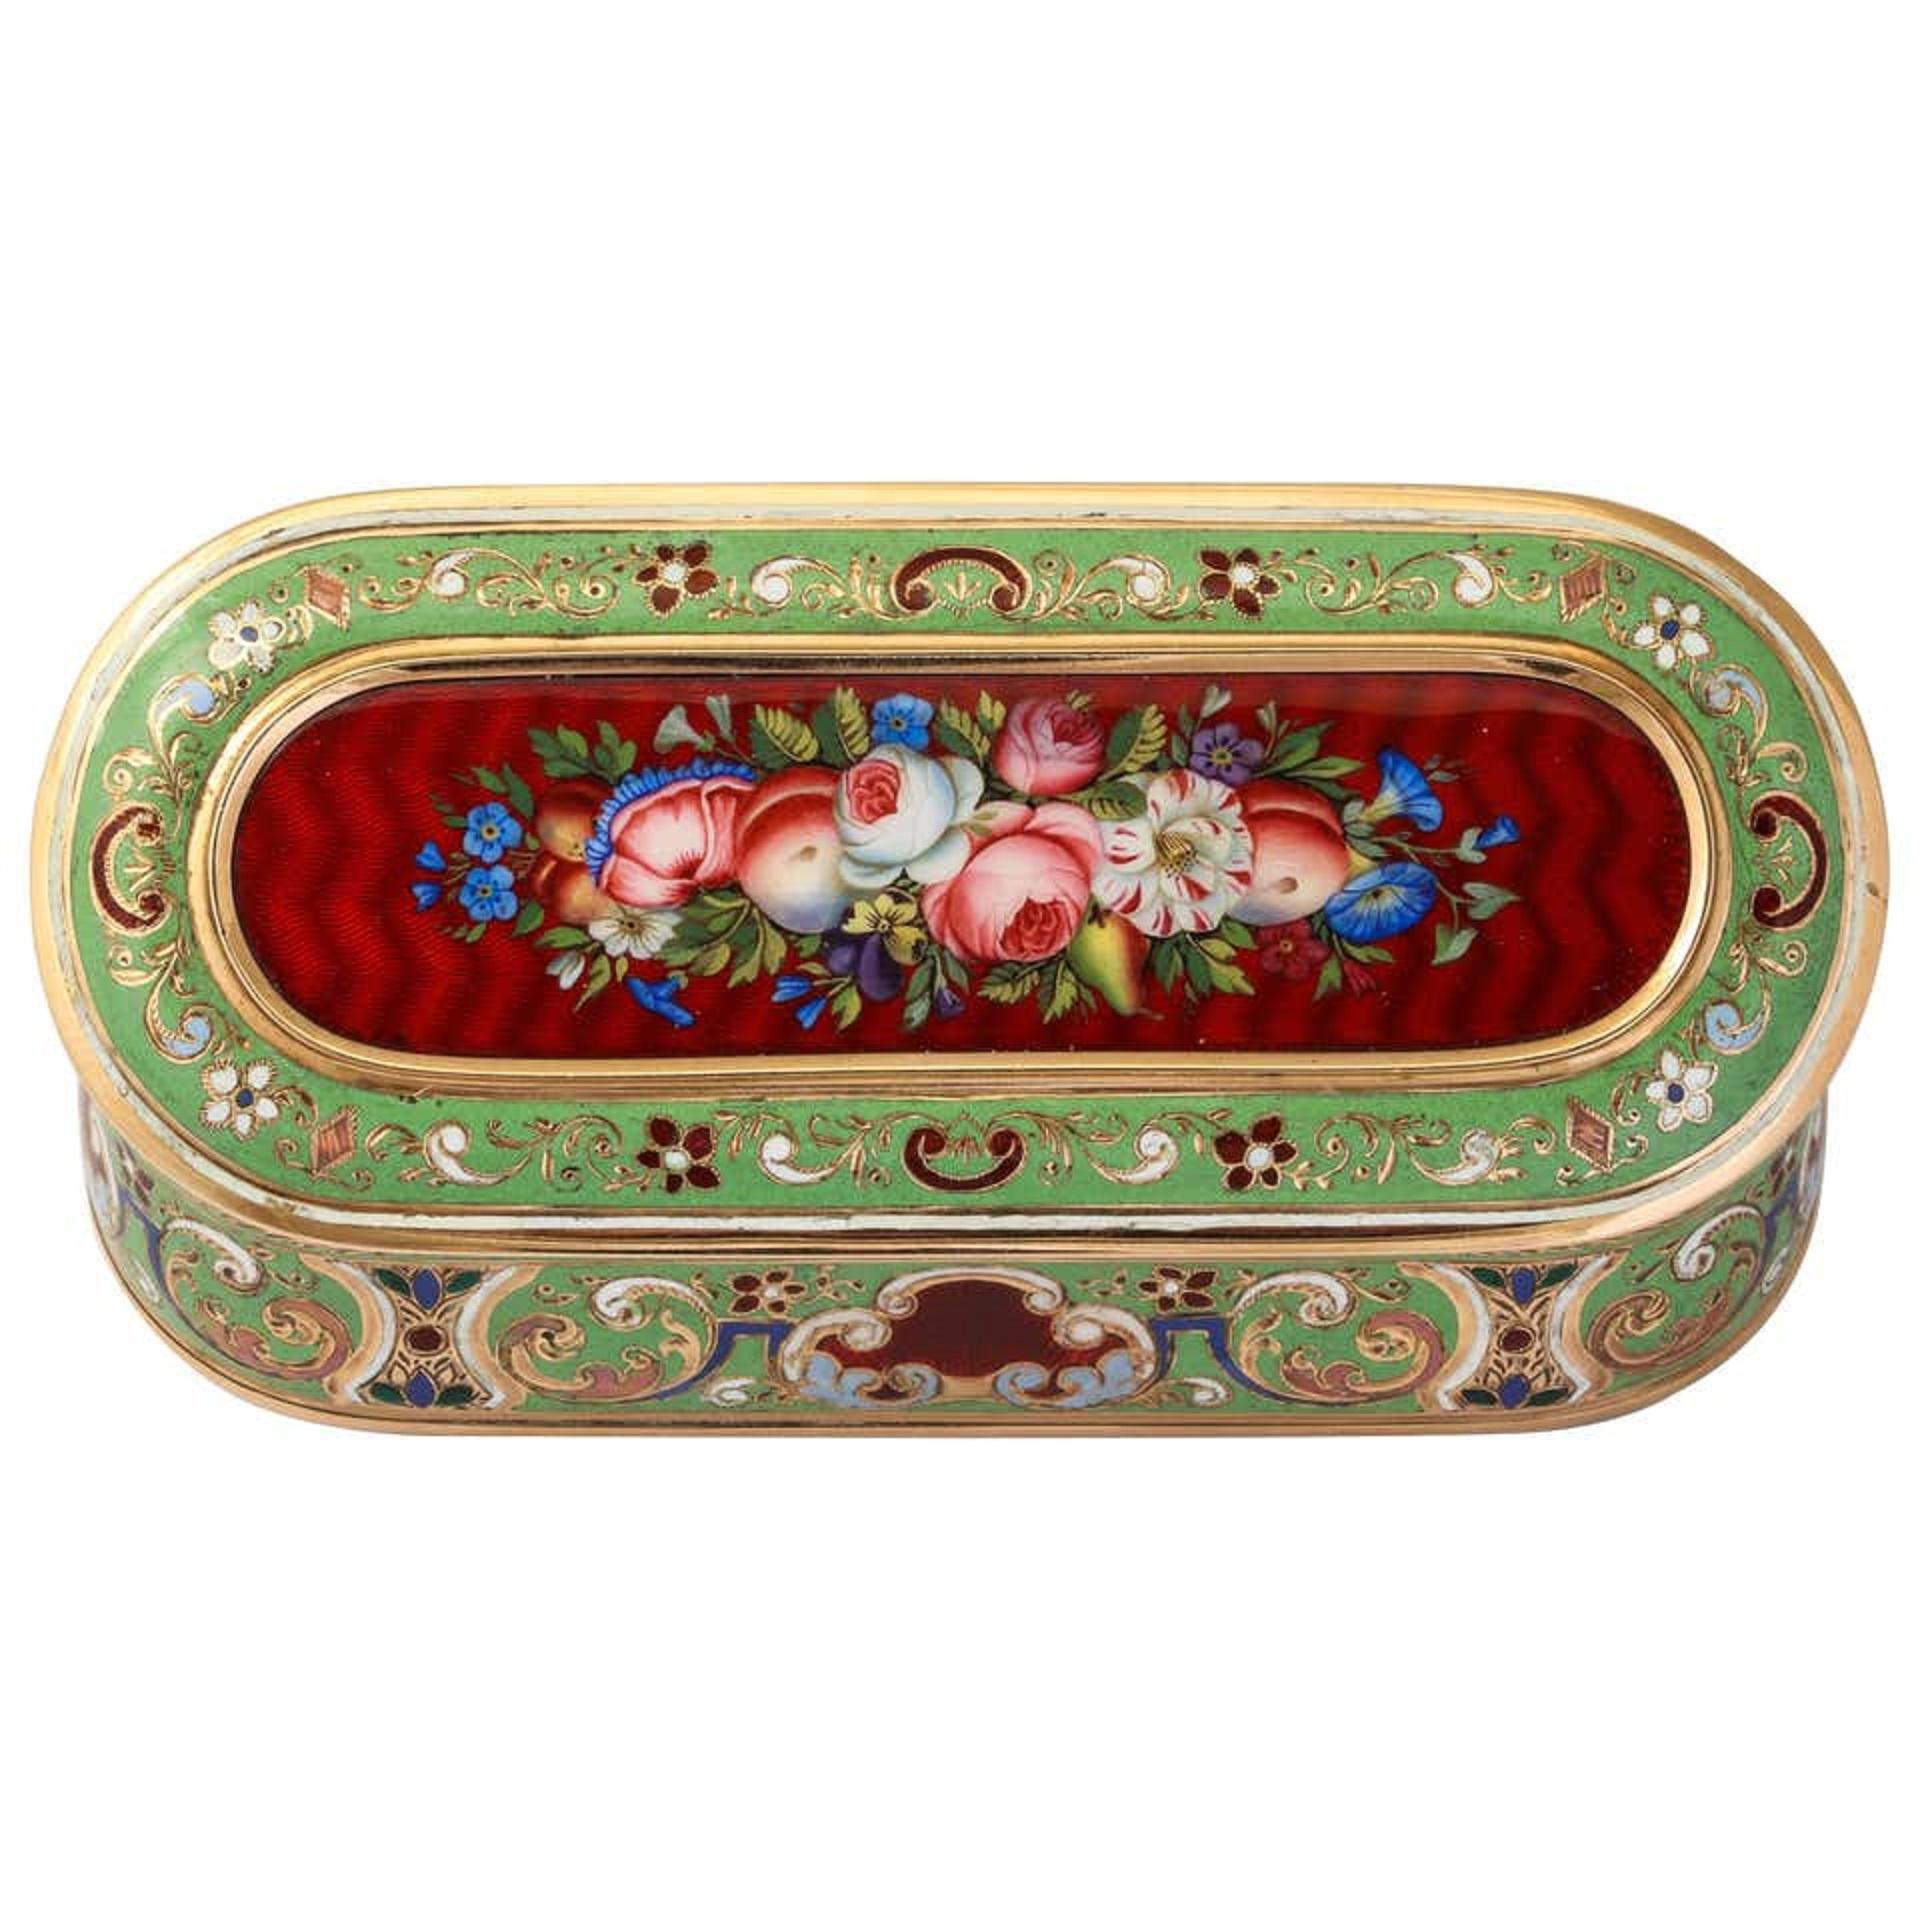 Antique Swiss Enamel Snuff Box Made for Turkish and Chinese Market

Made in Switzerland, circa 1850

Weight: 110.7